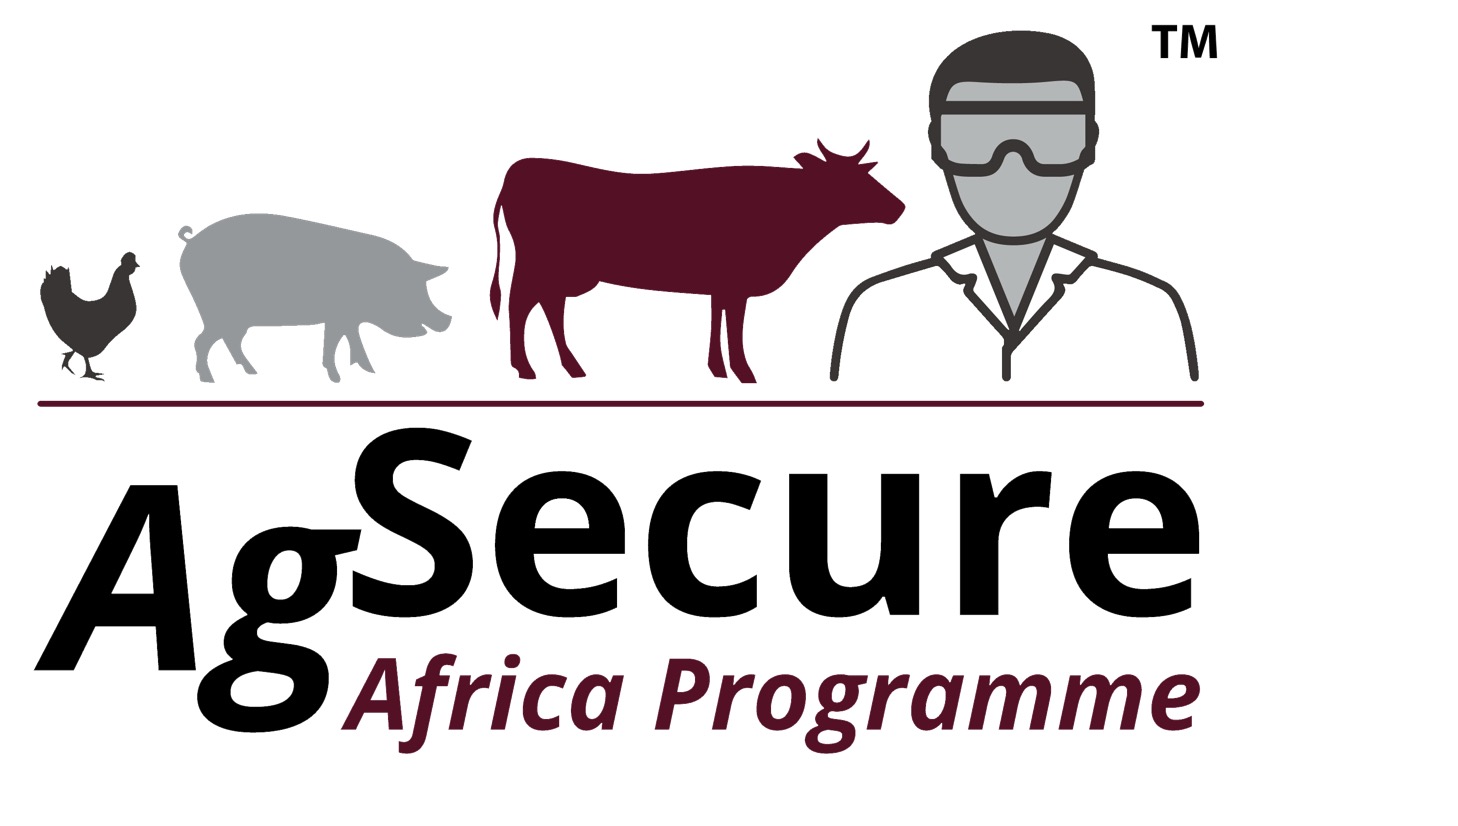 Ag secure Africa Programme